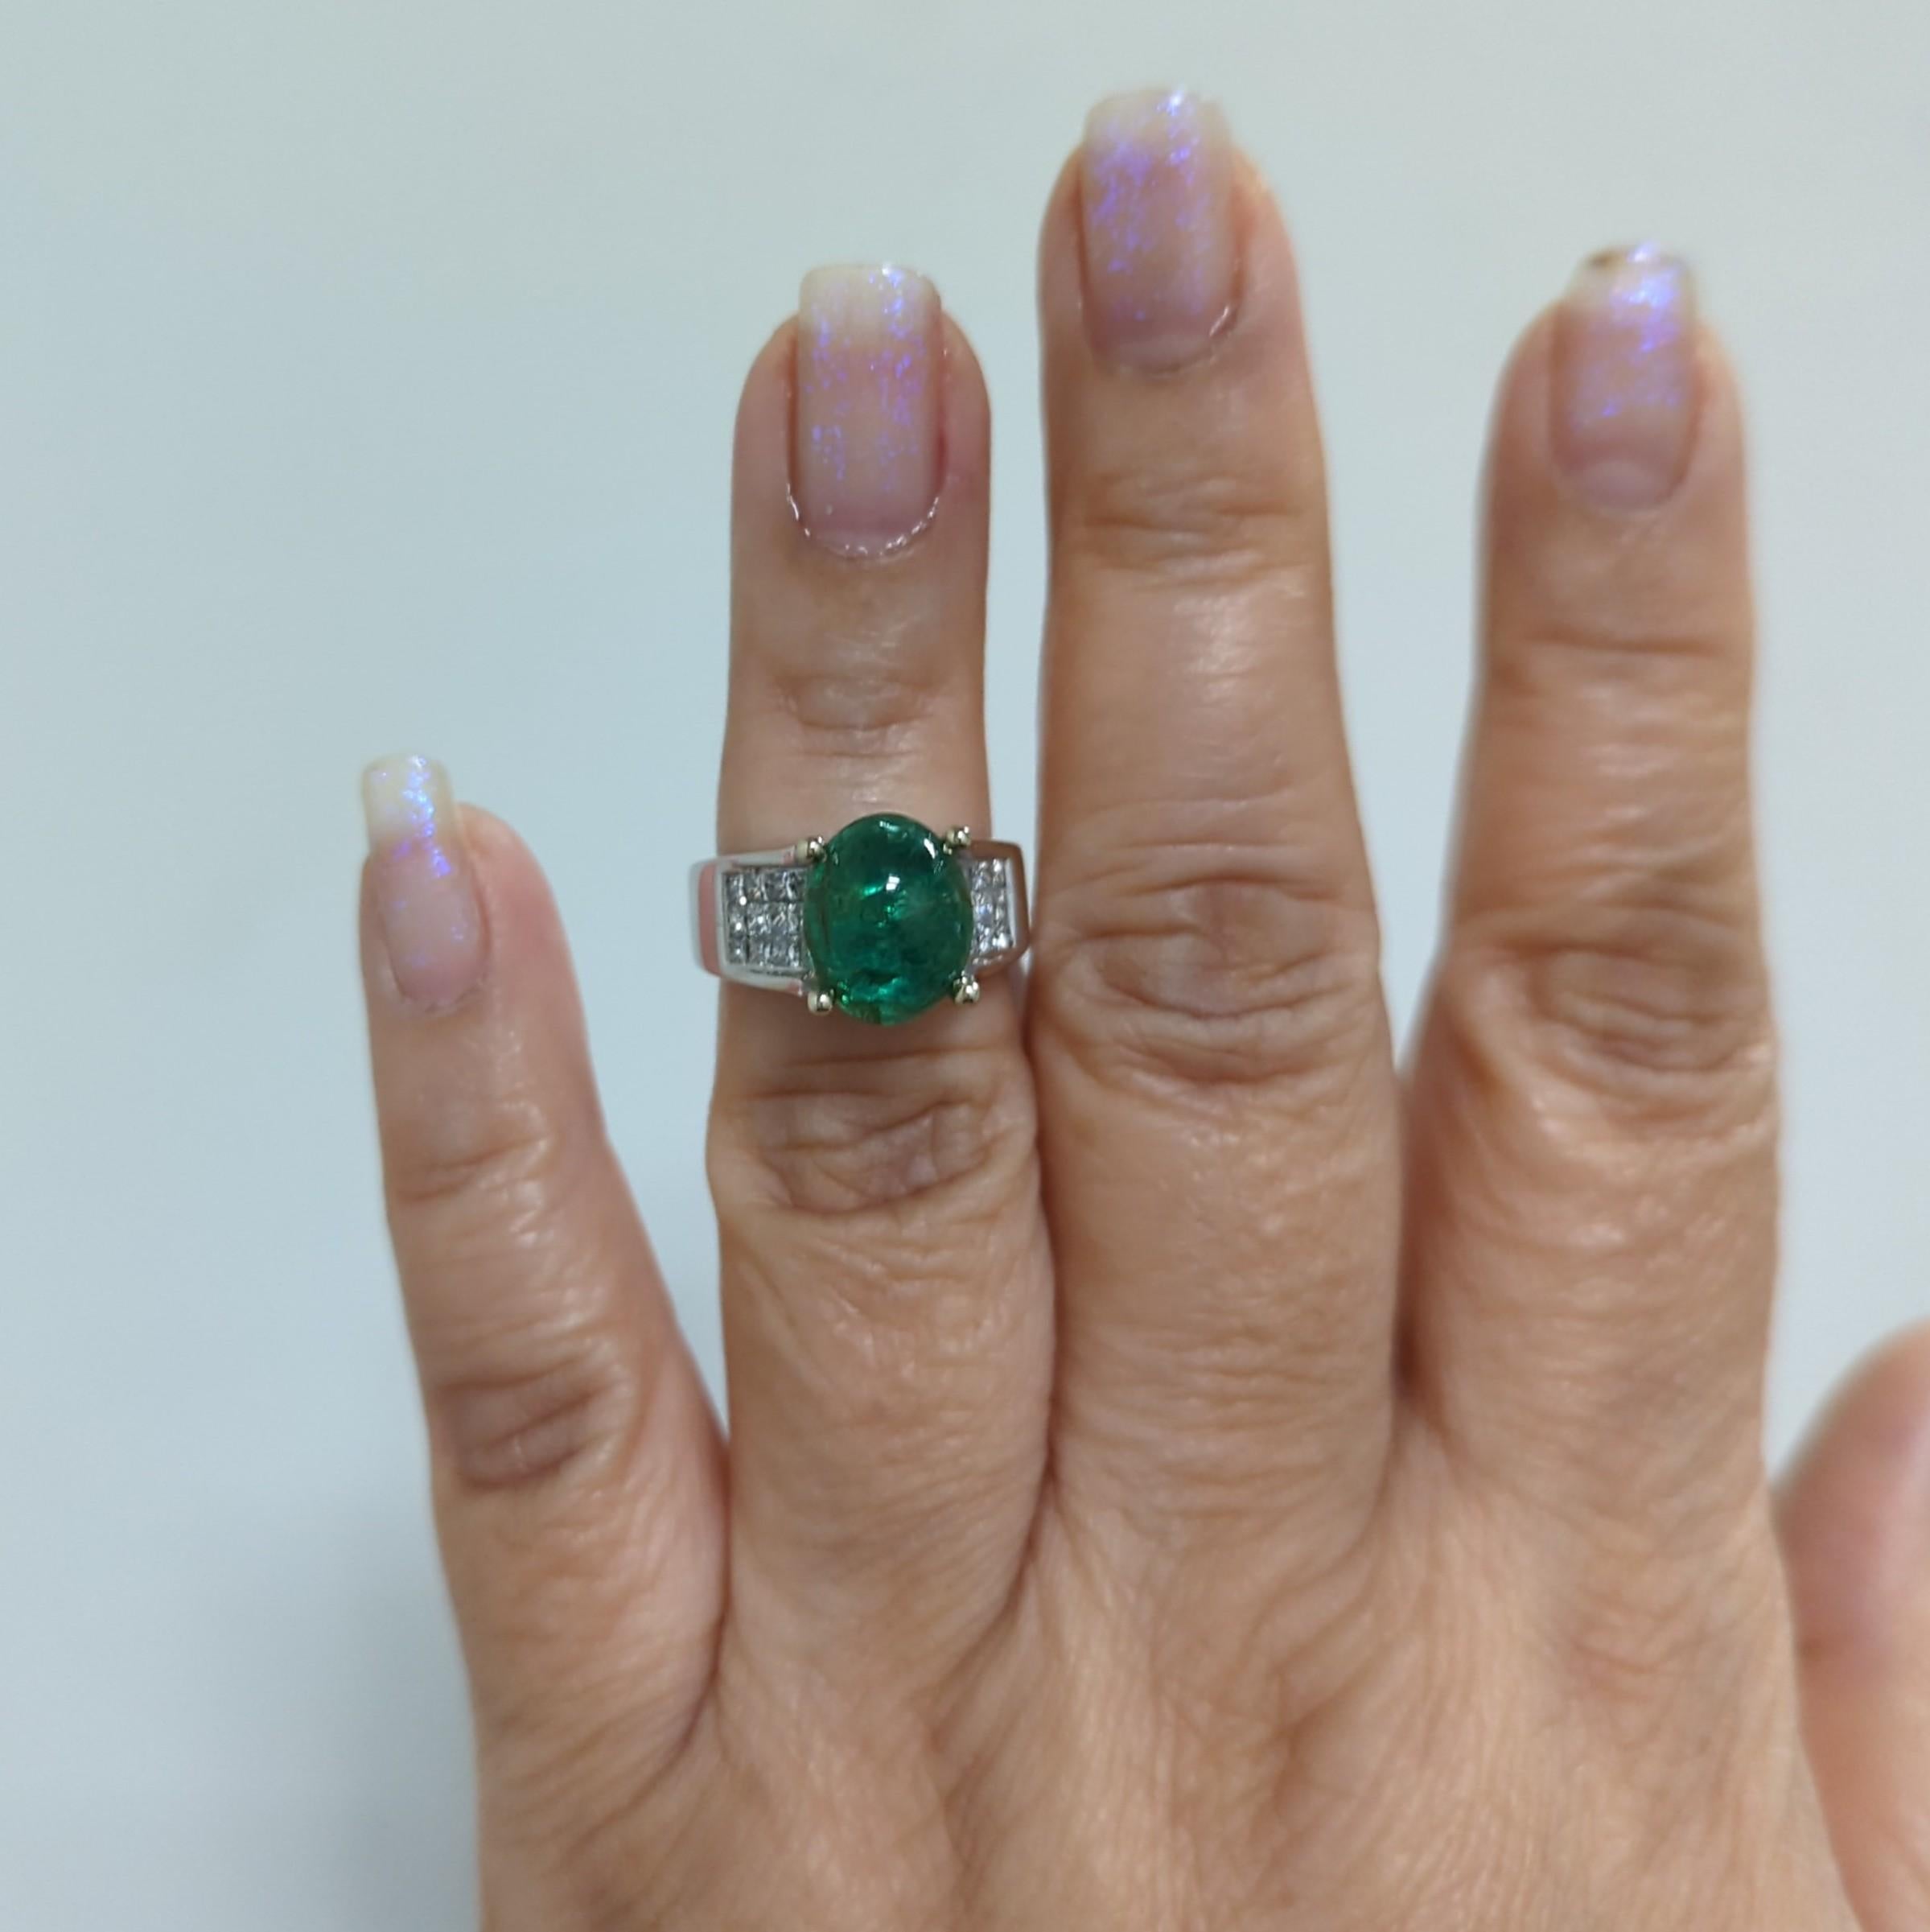 Beautiful 4.24 ct. emerald oval cabochon with 1.00 ct. good quality white diamond princess cuts.  Handmade in 18k white gold.  Ring size 6.